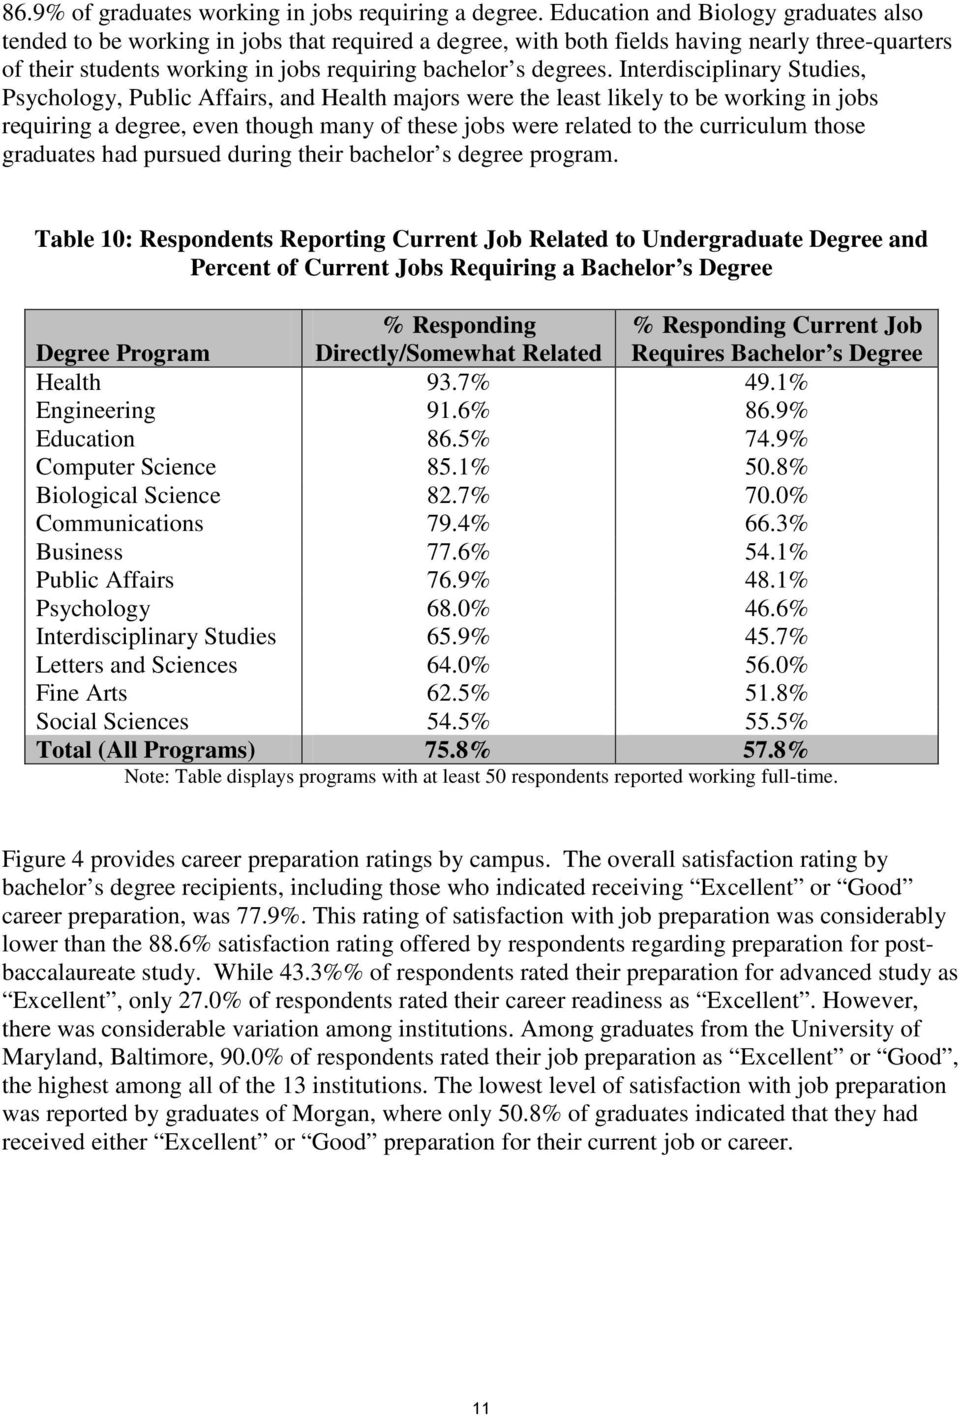 Interdisciplinary Studies, Psychology, Public Affairs, and Health majors were the least likely to be working in jobs requiring a degree, even though many of these jobs were related to the curriculum